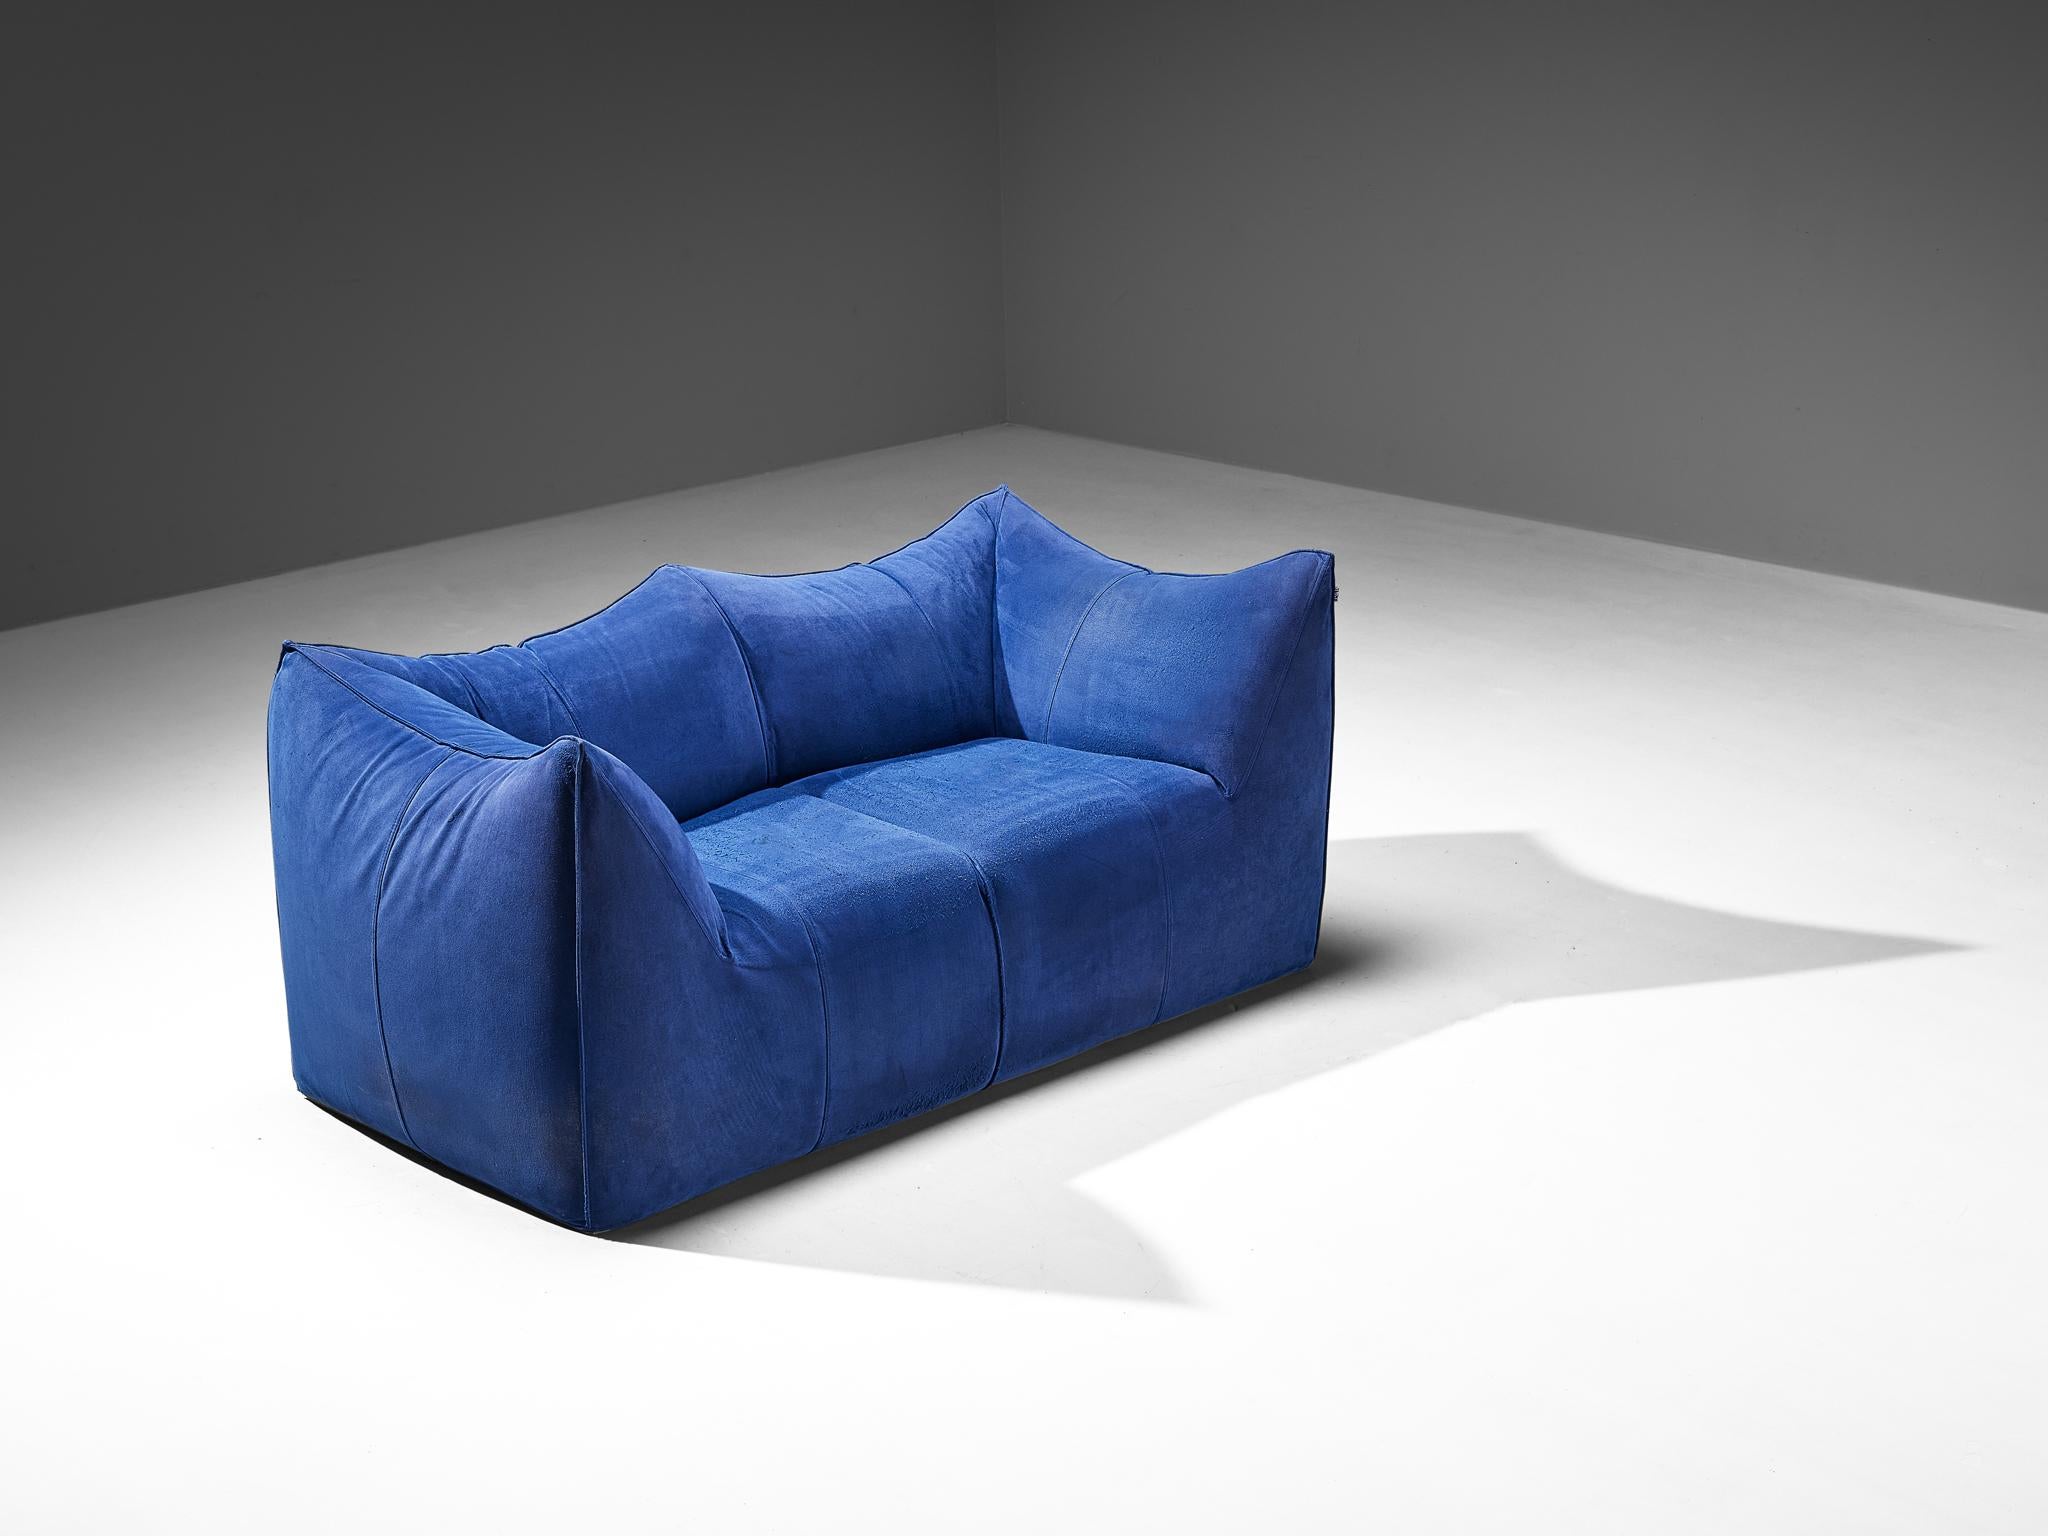 Mario Bellini for B&B Italia, 'Le Bambole' sofa, suede, Italy, 1972. 

This comfortable sofa executed in blue suede is bulky and playful, shaped as if it were merely a large cushion and the accompanying feeling is the same. It is designed by Mario